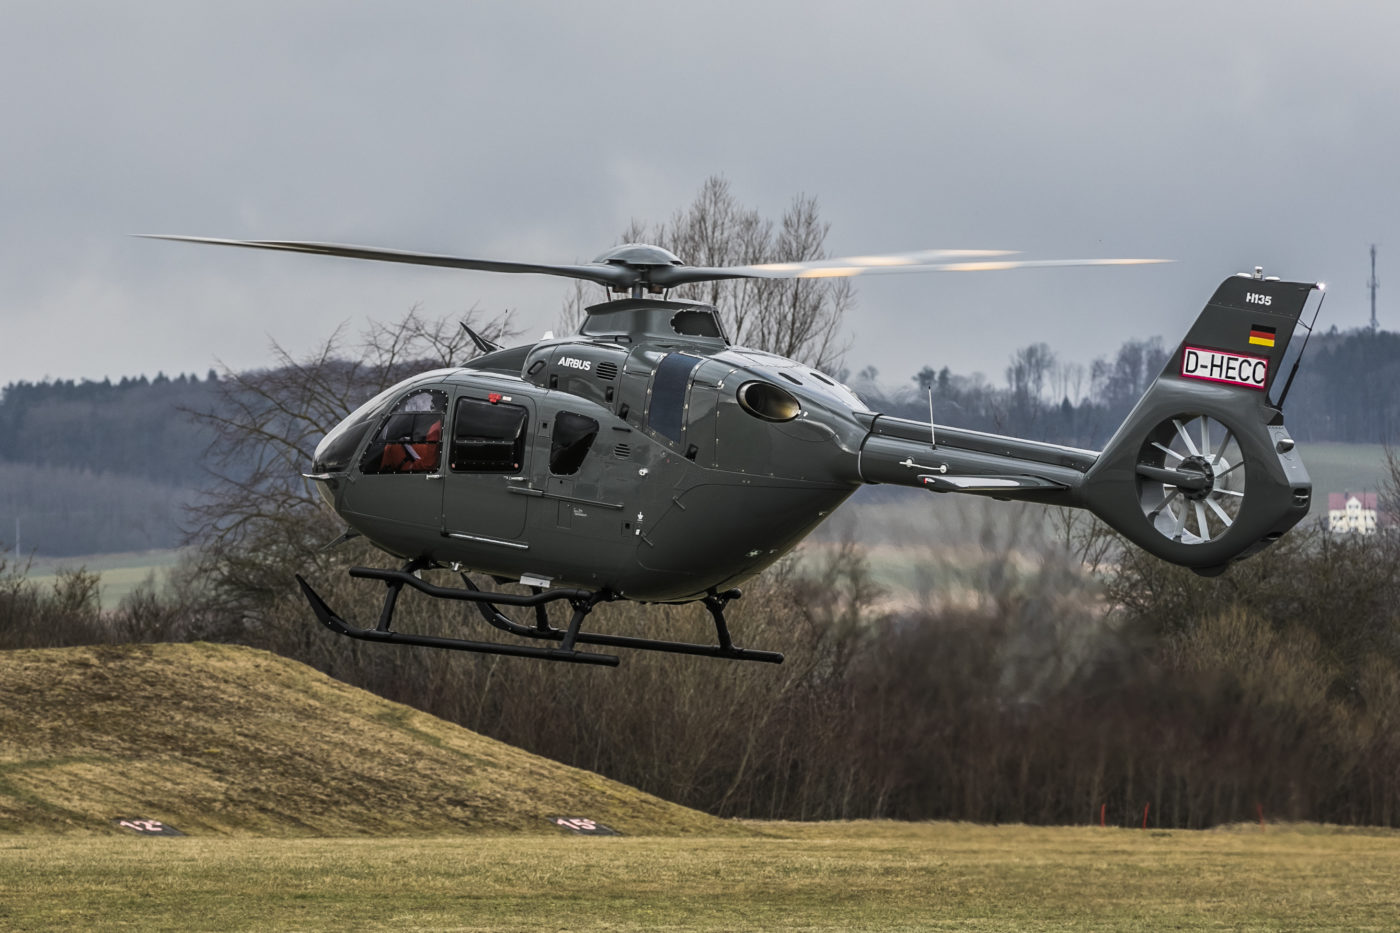 The lease transaction marks Waypoint’s seventh H135 delivery, as well as its first transaction with ALT.